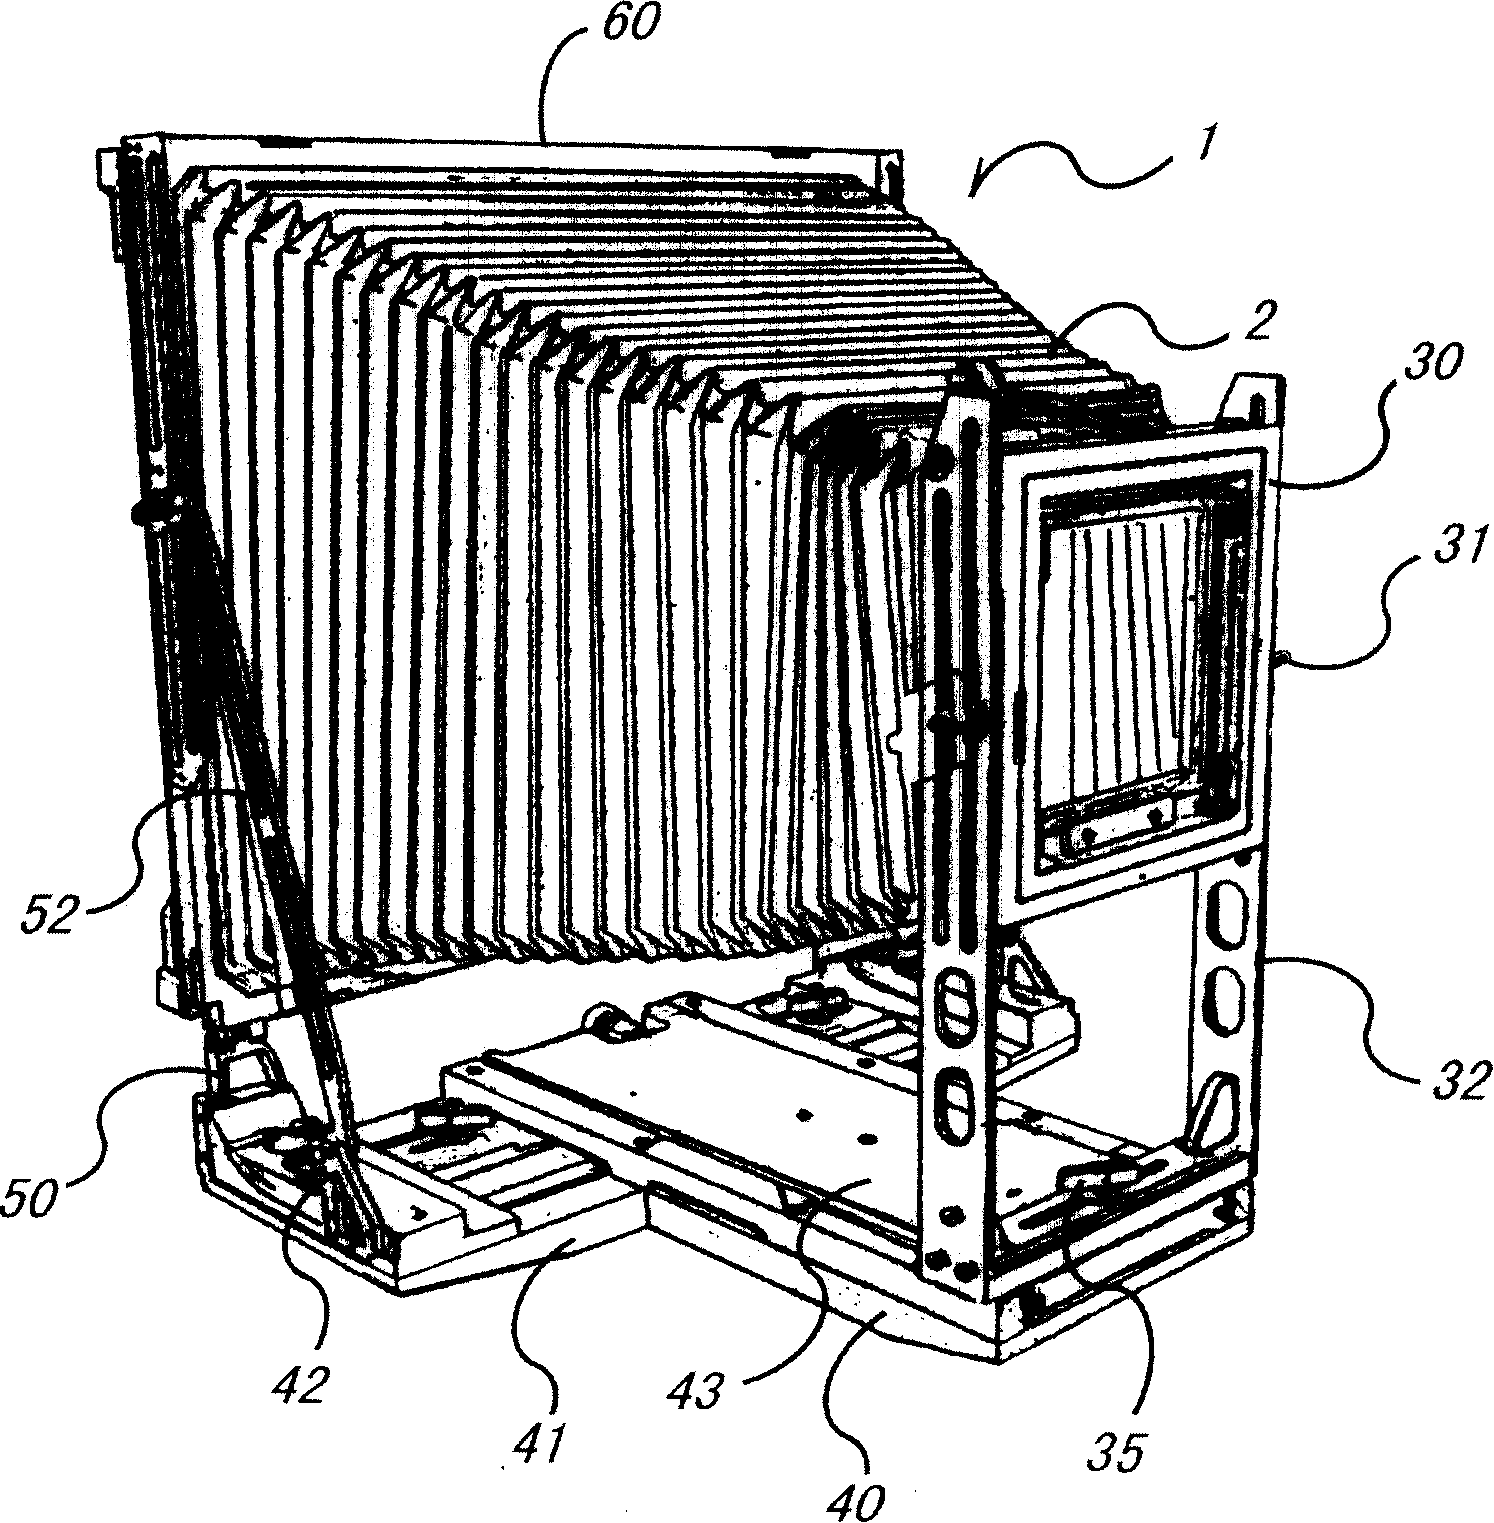 Base structure of camera